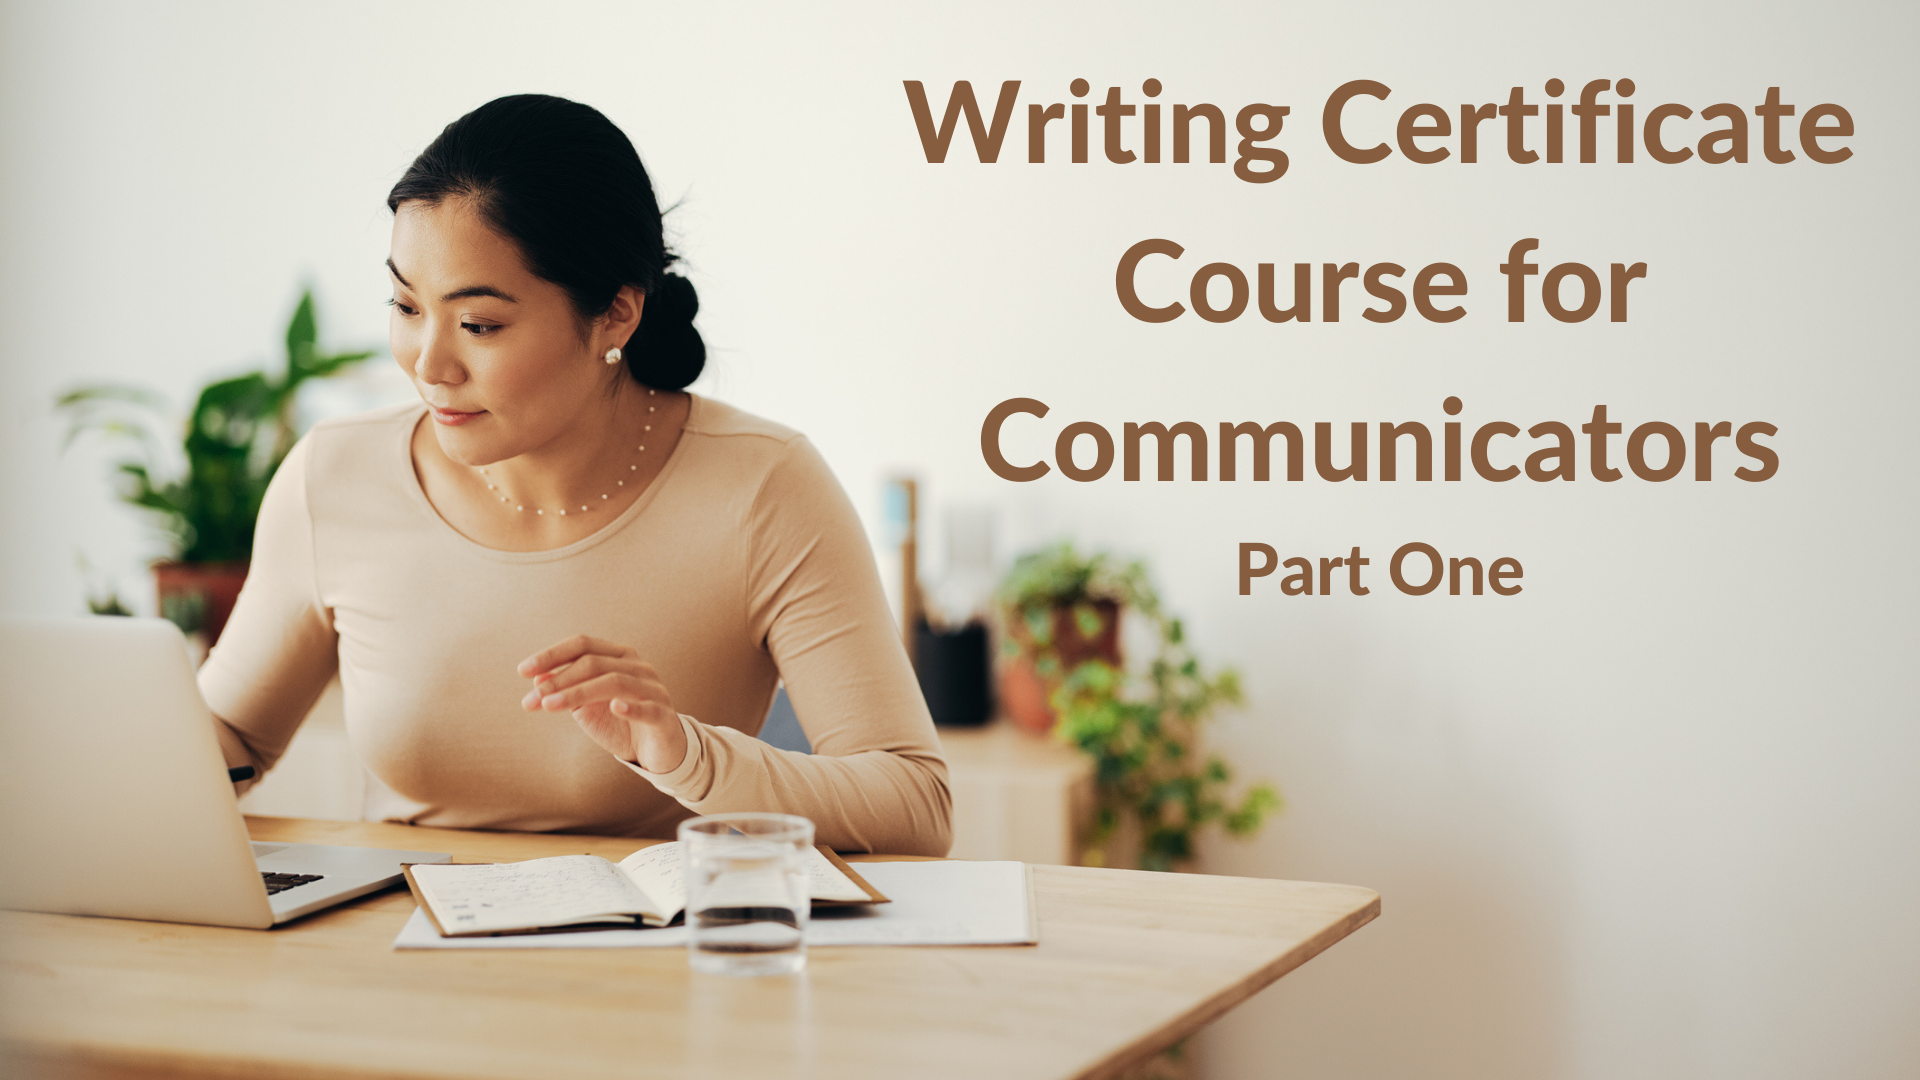 Writing Certificate Course for Communicators Part One